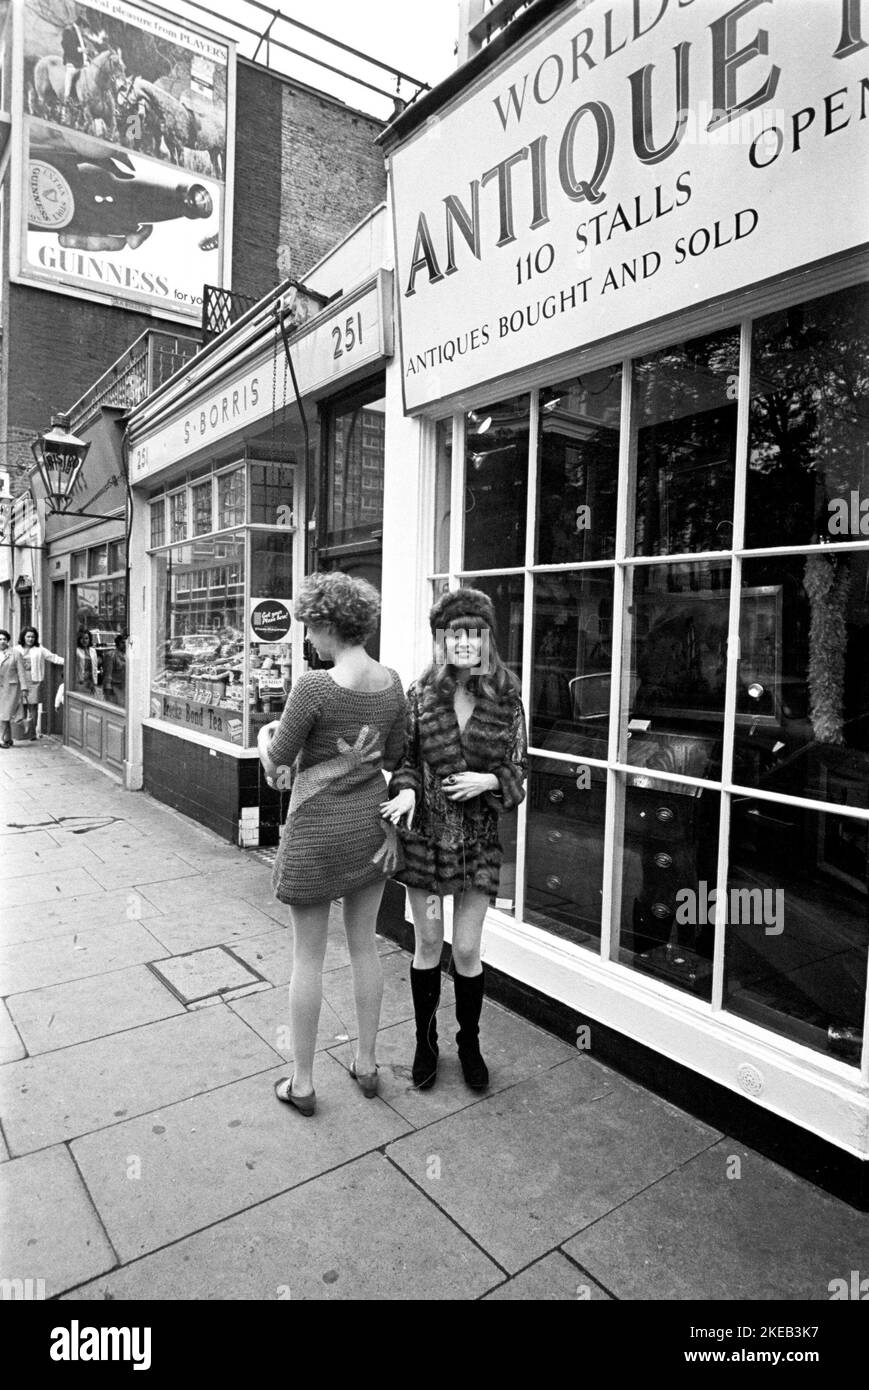 London in the 1960s. Birgitta Bjerke and Ulla Larsson at 251 Kings Road in front of the Antique market stalls. They are wearing the very typical 1960s fashion of their own design. Picture taken during the era of the Swinging Sixties, a youth-driven cultural revoluton in the UK in the mid to late 1960s. Note the typical hand patterned clothing.  London England October 1967. Stock Photo